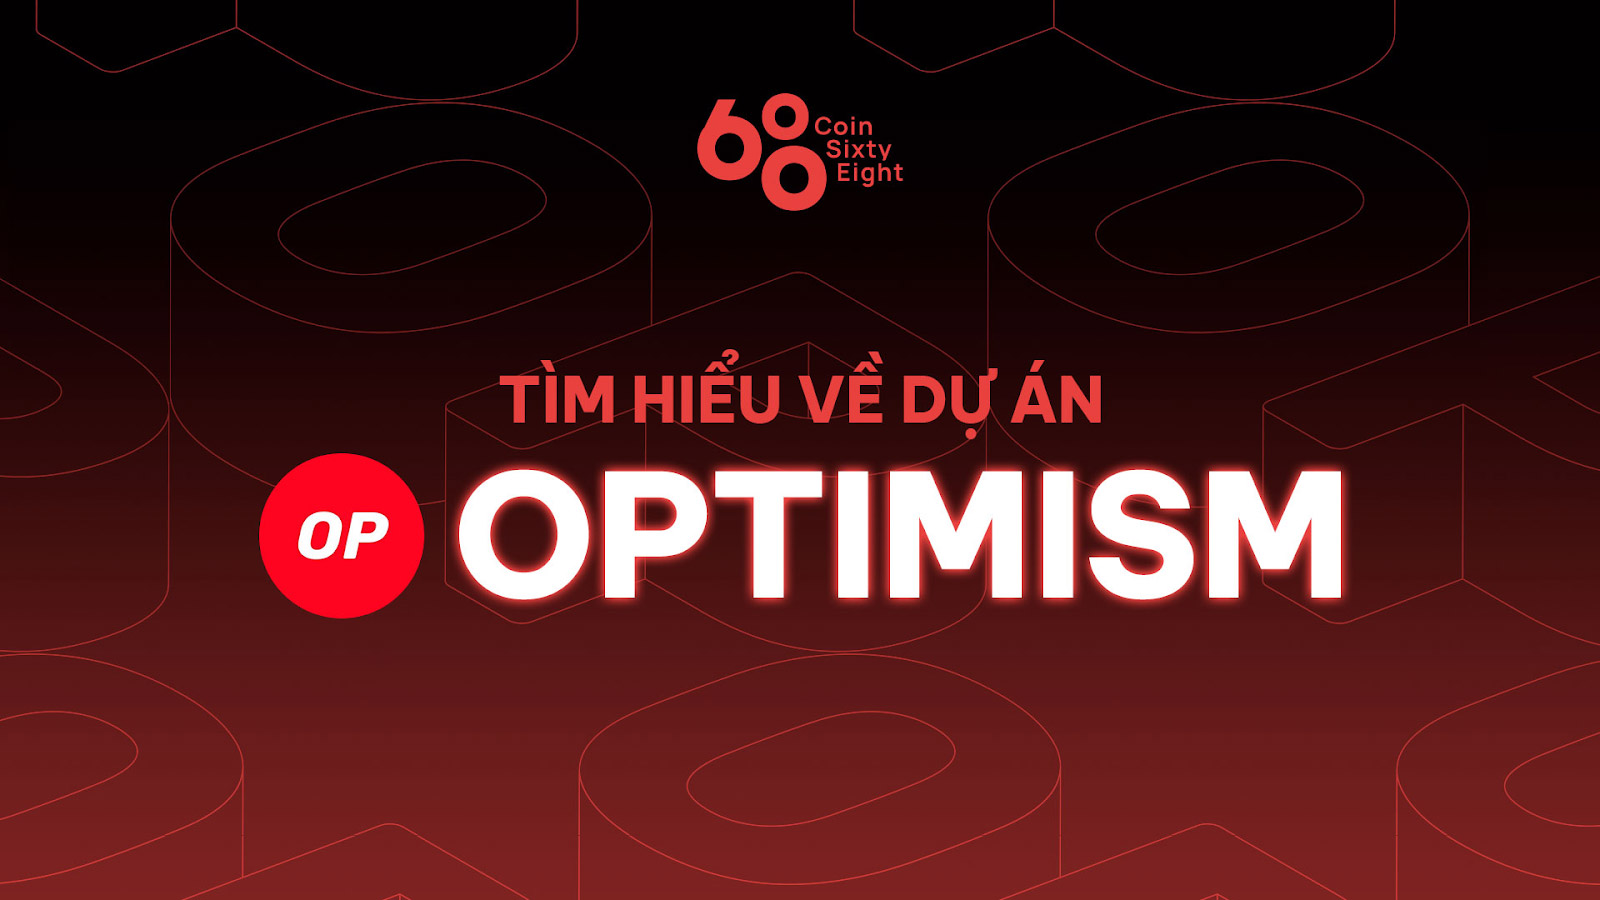 Optimism of the project